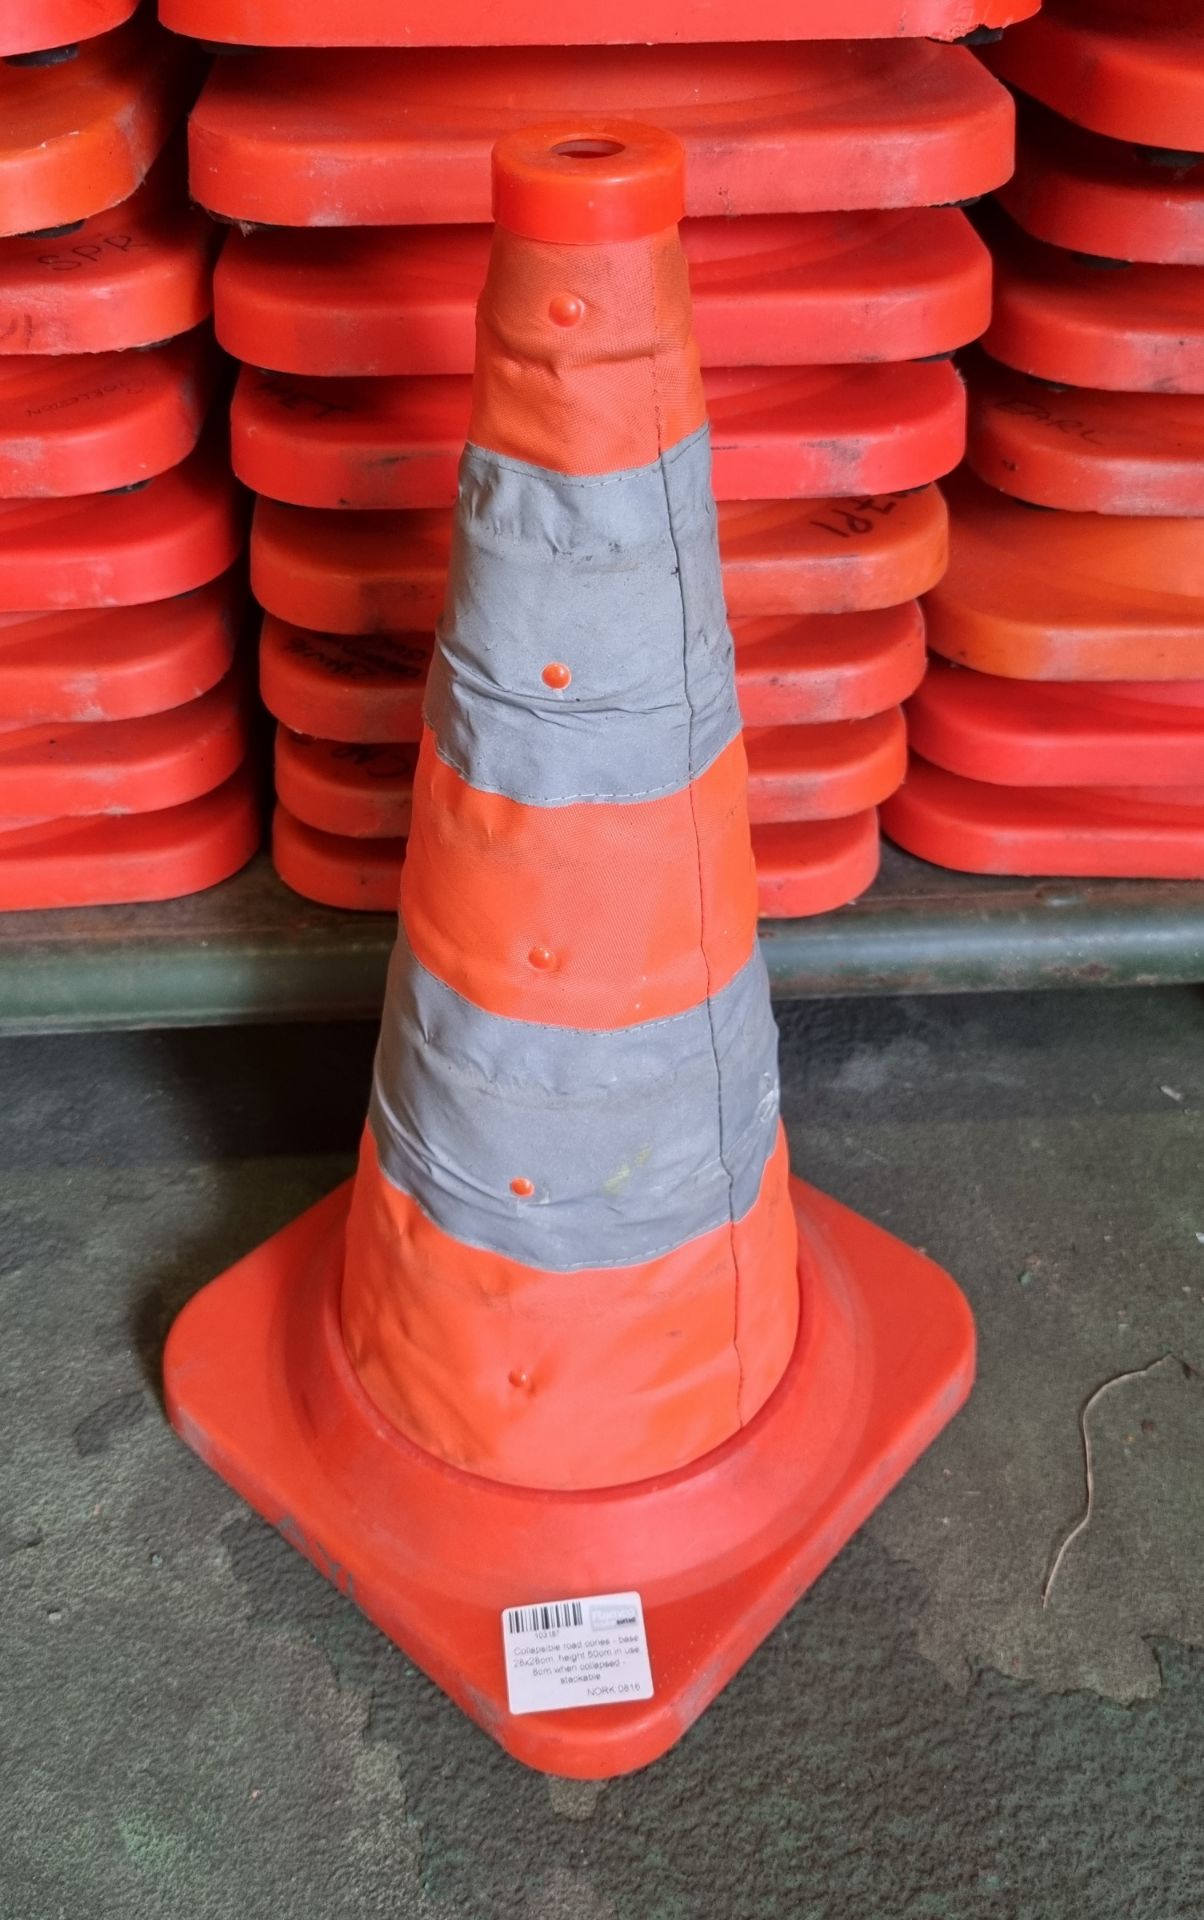 256x Collapsible road cones - base 28x28cm, height 50cm in use, 8cm when collapsed - stackable - Bild 2 aus 3